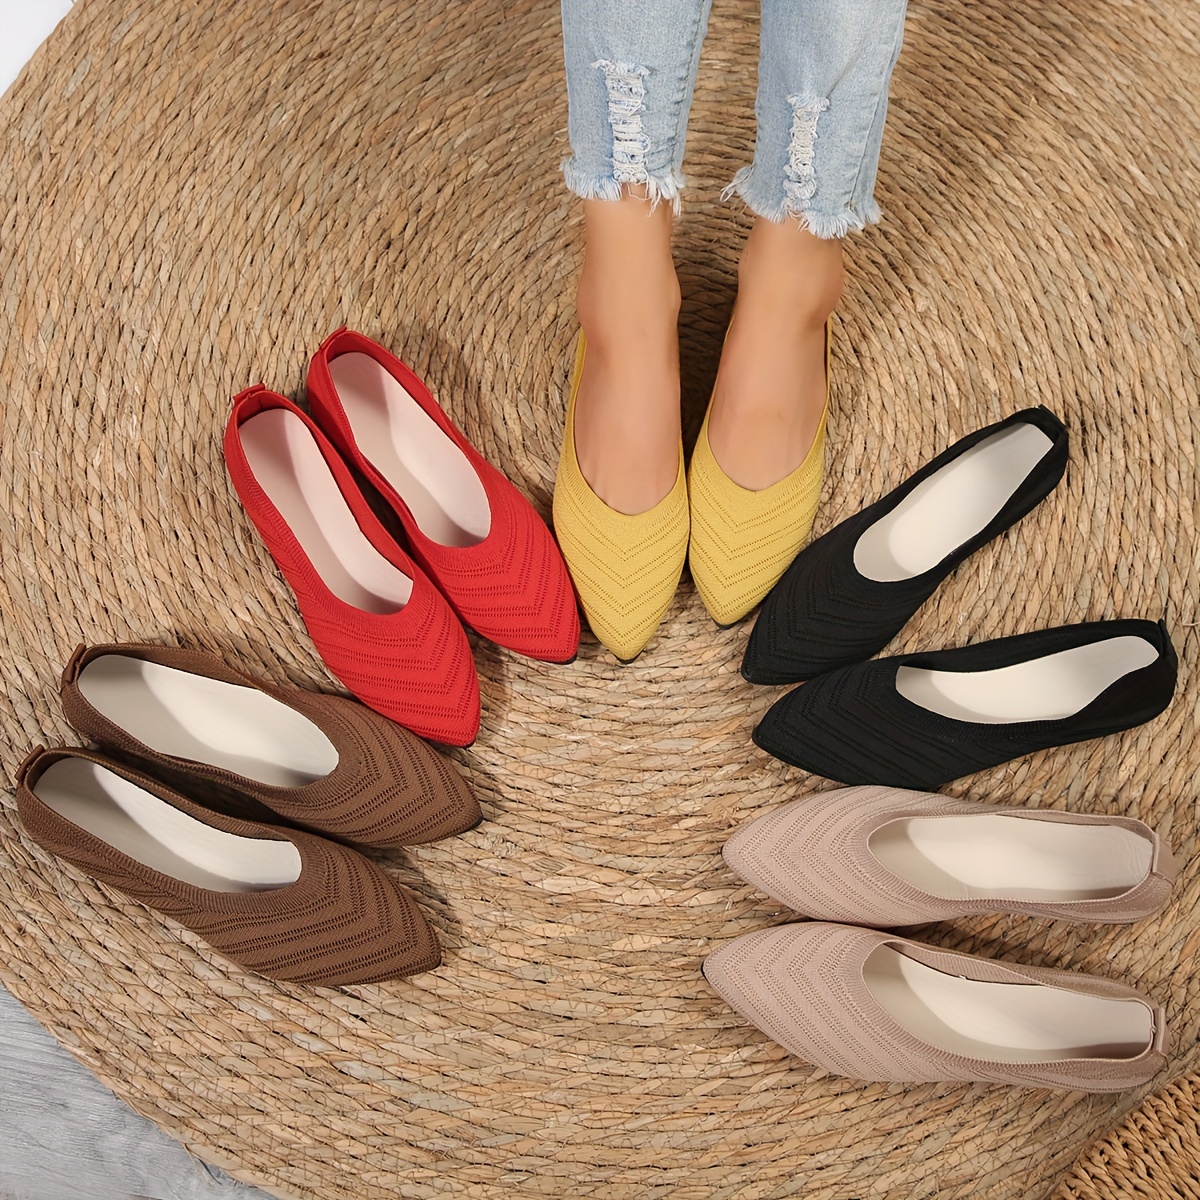 

Women's Pointed Toe Flat Shoes, Solid Color Knitted Slip On Shoes, Casual Breathable Ballet Flats